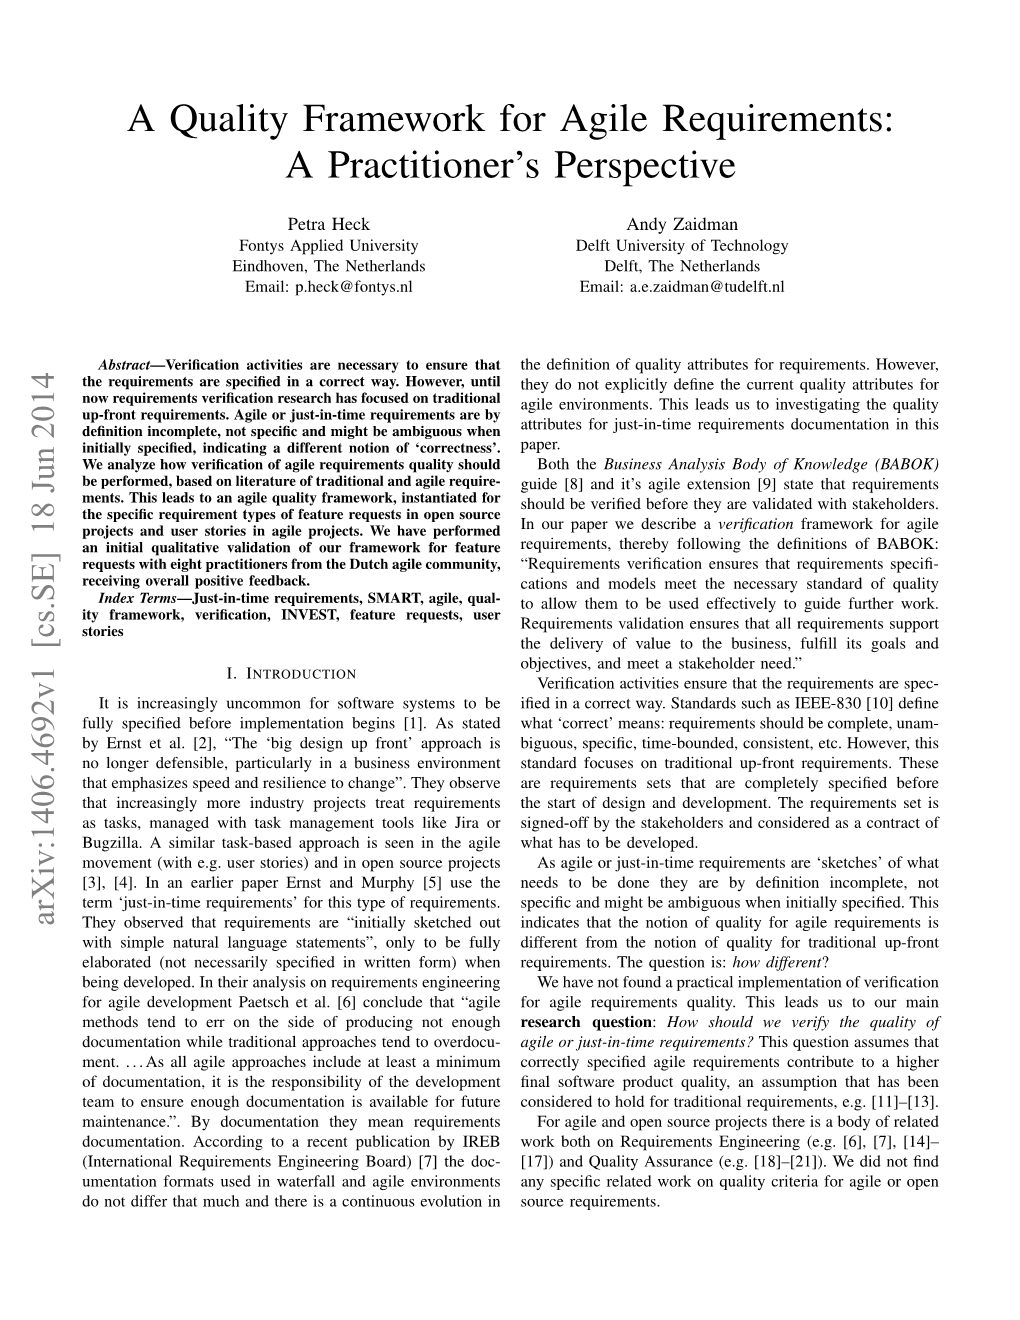 A Quality Framework for Agile Requirements: a Practitioner’S Perspective